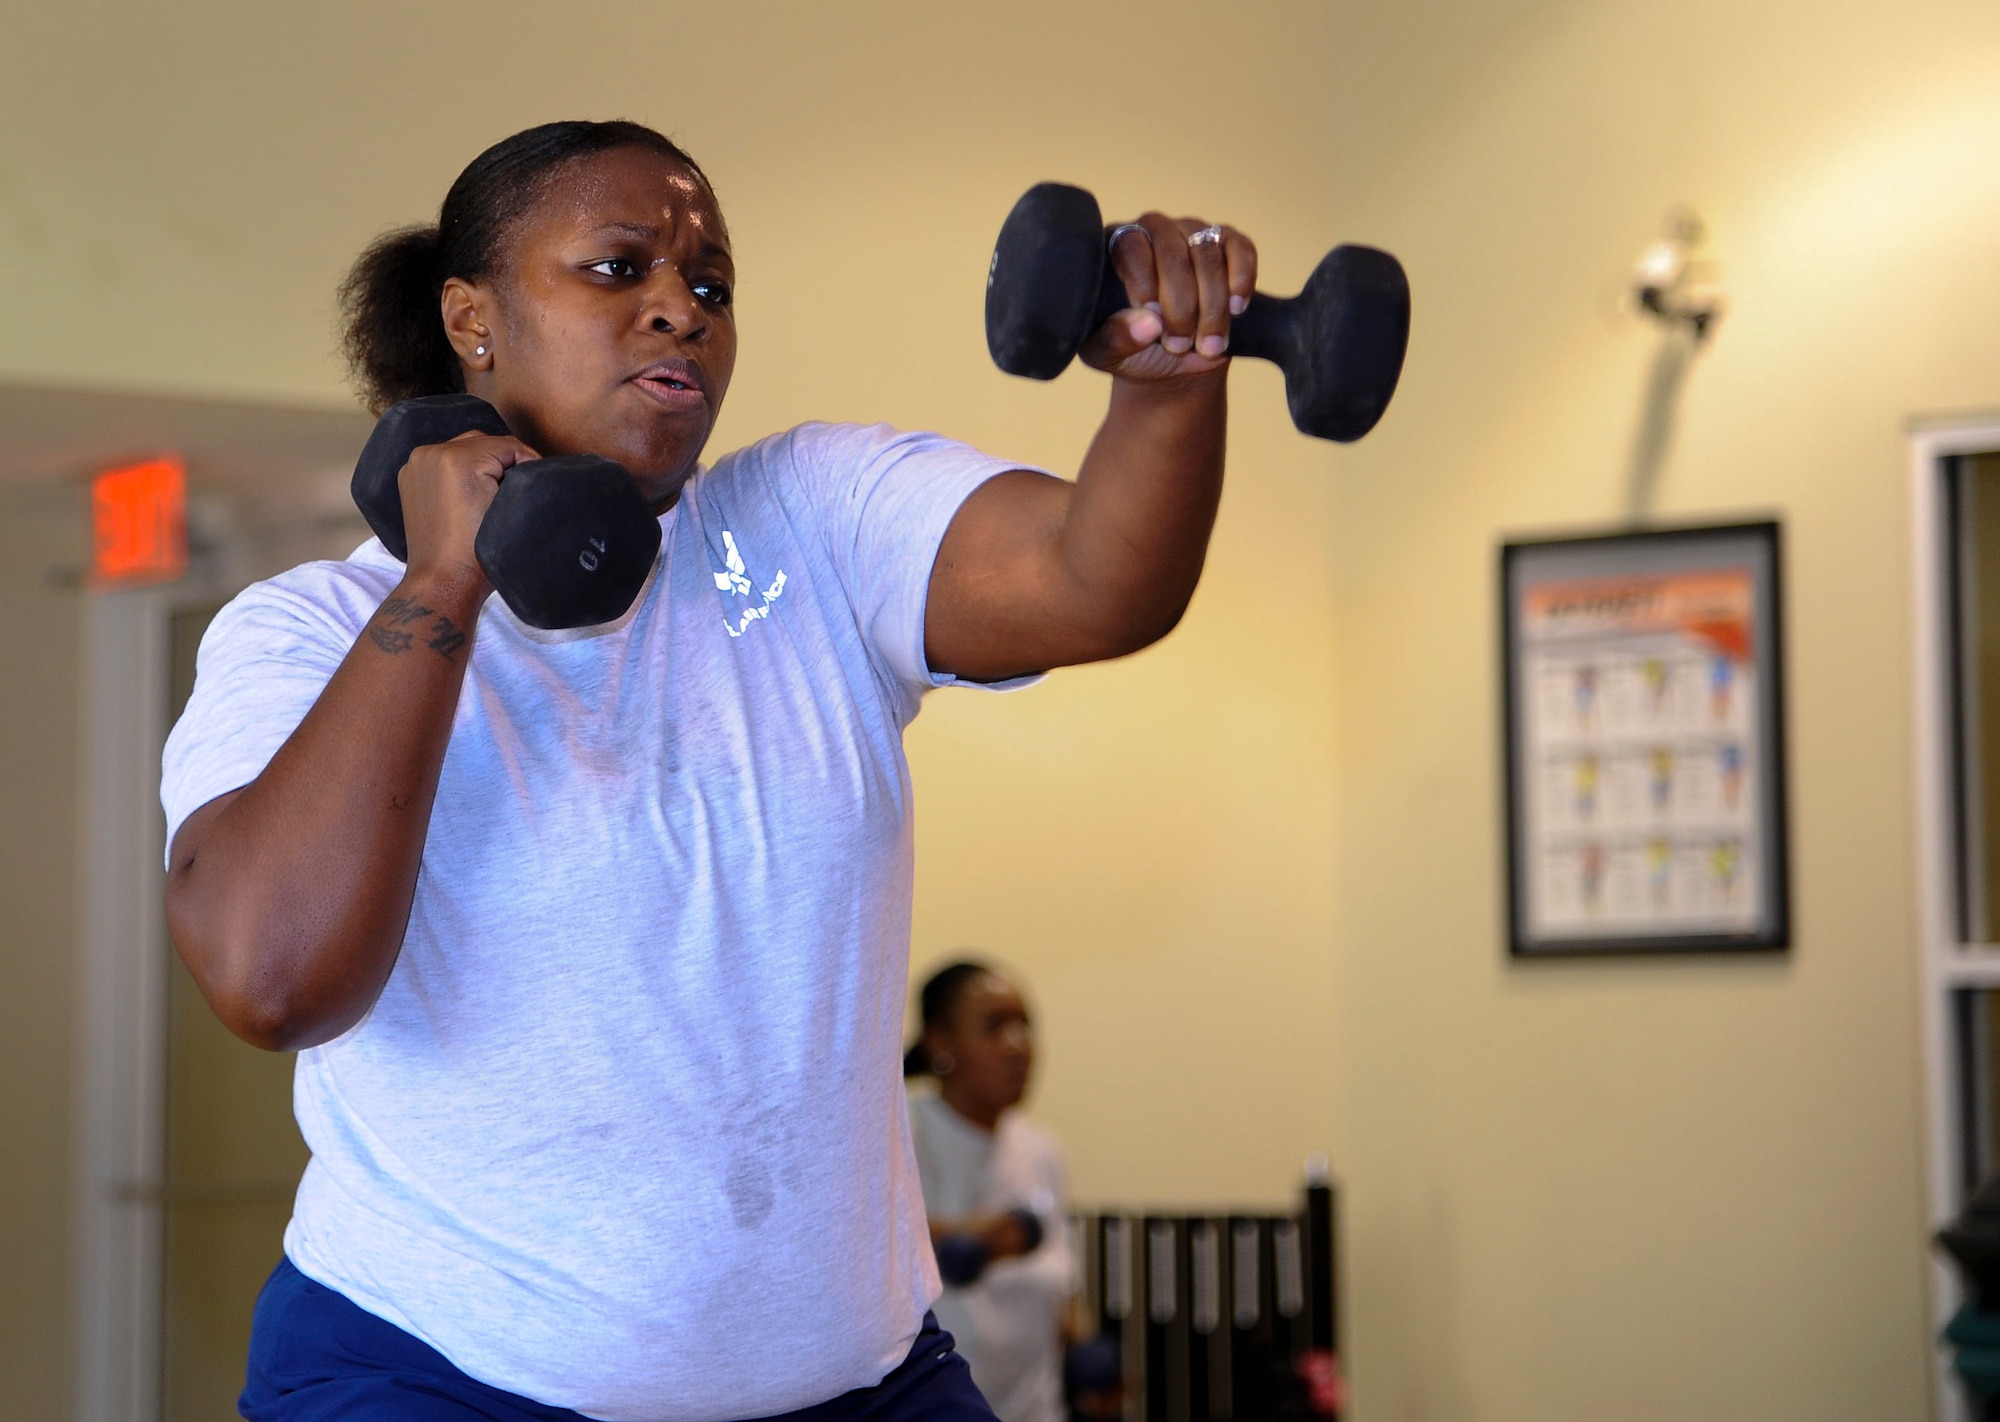 Staff Sgt. Marcia Deloach, 1st Special Operations Aerospace Medicine Squadron public health technician worksout during a Post Pregnancy physical training session at the Riptide Fitness Center on Hurlburt Field, Fla., June 17, 2013. Each session consists of full body movements, pushups, squats and sprints. (U.S. Air Force photo by Airman 1st Class Jeffrey Parkinson)